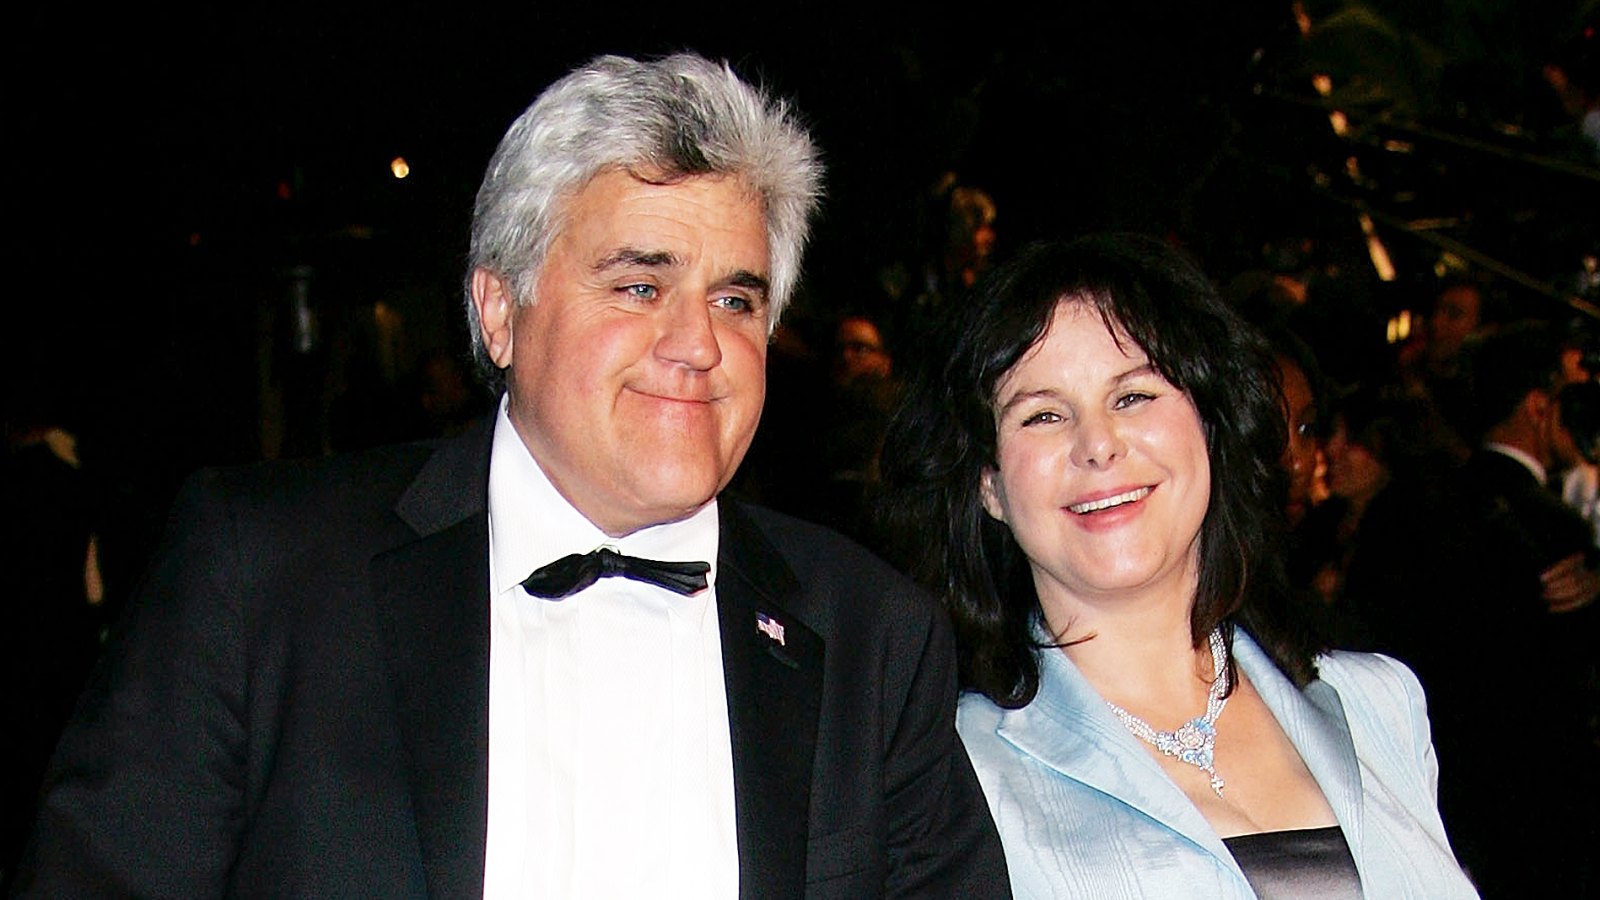 Jay Leno Filed for Conservatorship of Wife Mavis to Prepare for Future After Her Dementia Diagnosis